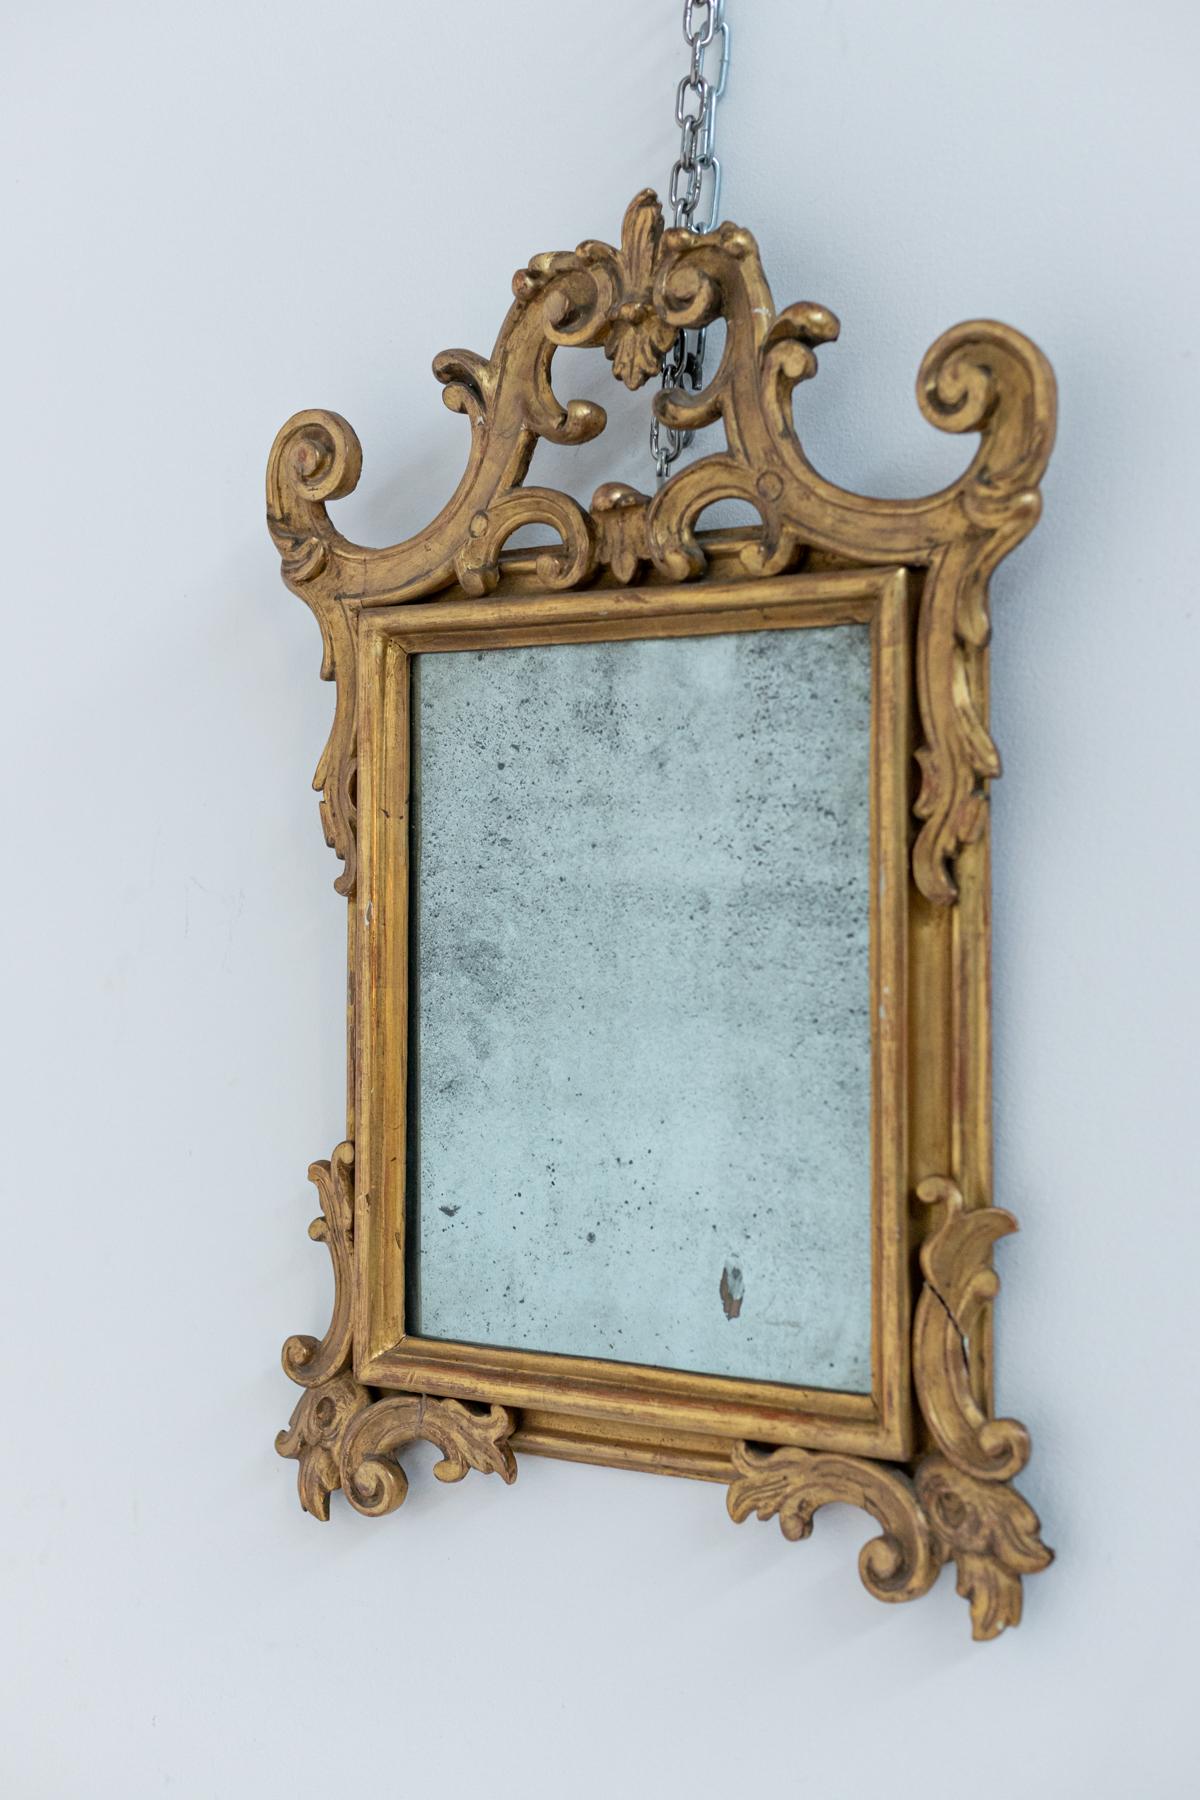 Elegant pair of antique Italian mirrors dating from around 1700. The pair of mirrors is made of carved gilded wood. Its manufacture presents a valuable work of woodworking, we find carved into the wood several baroque elements such as leaves and